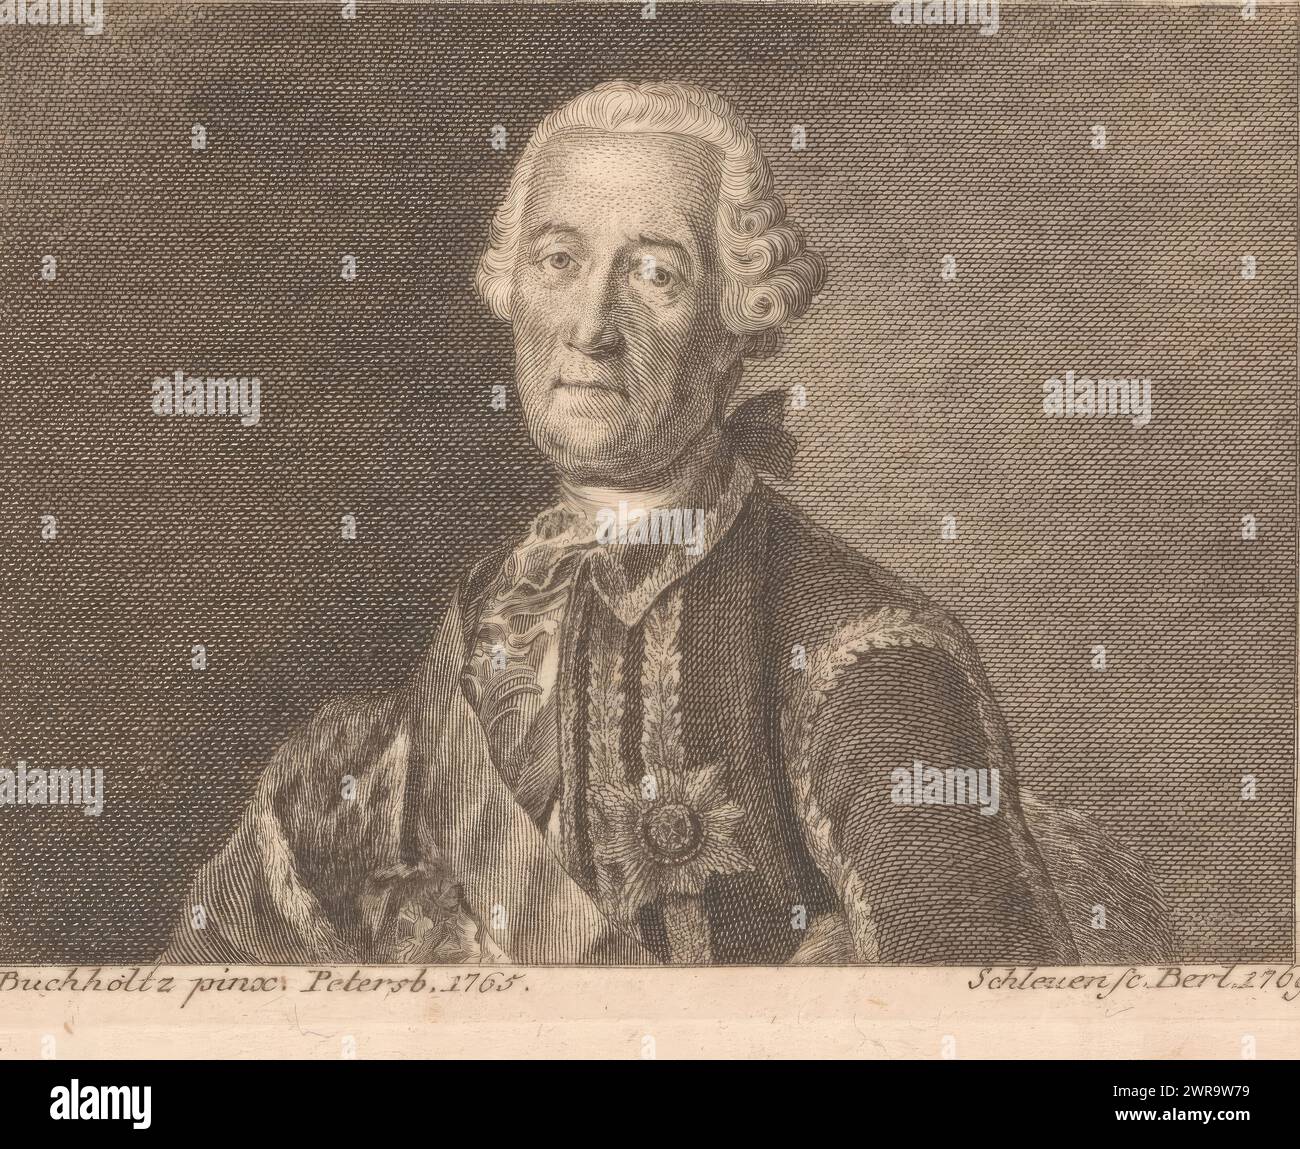 Portrait of an unknown man, print maker: Schleuen, after painting by: Buchholtz, print maker: Berlin, after painting by: St. Petersburg, 1769, paper, engraving, height 68 mm × width 100 mm, print Stock Photo